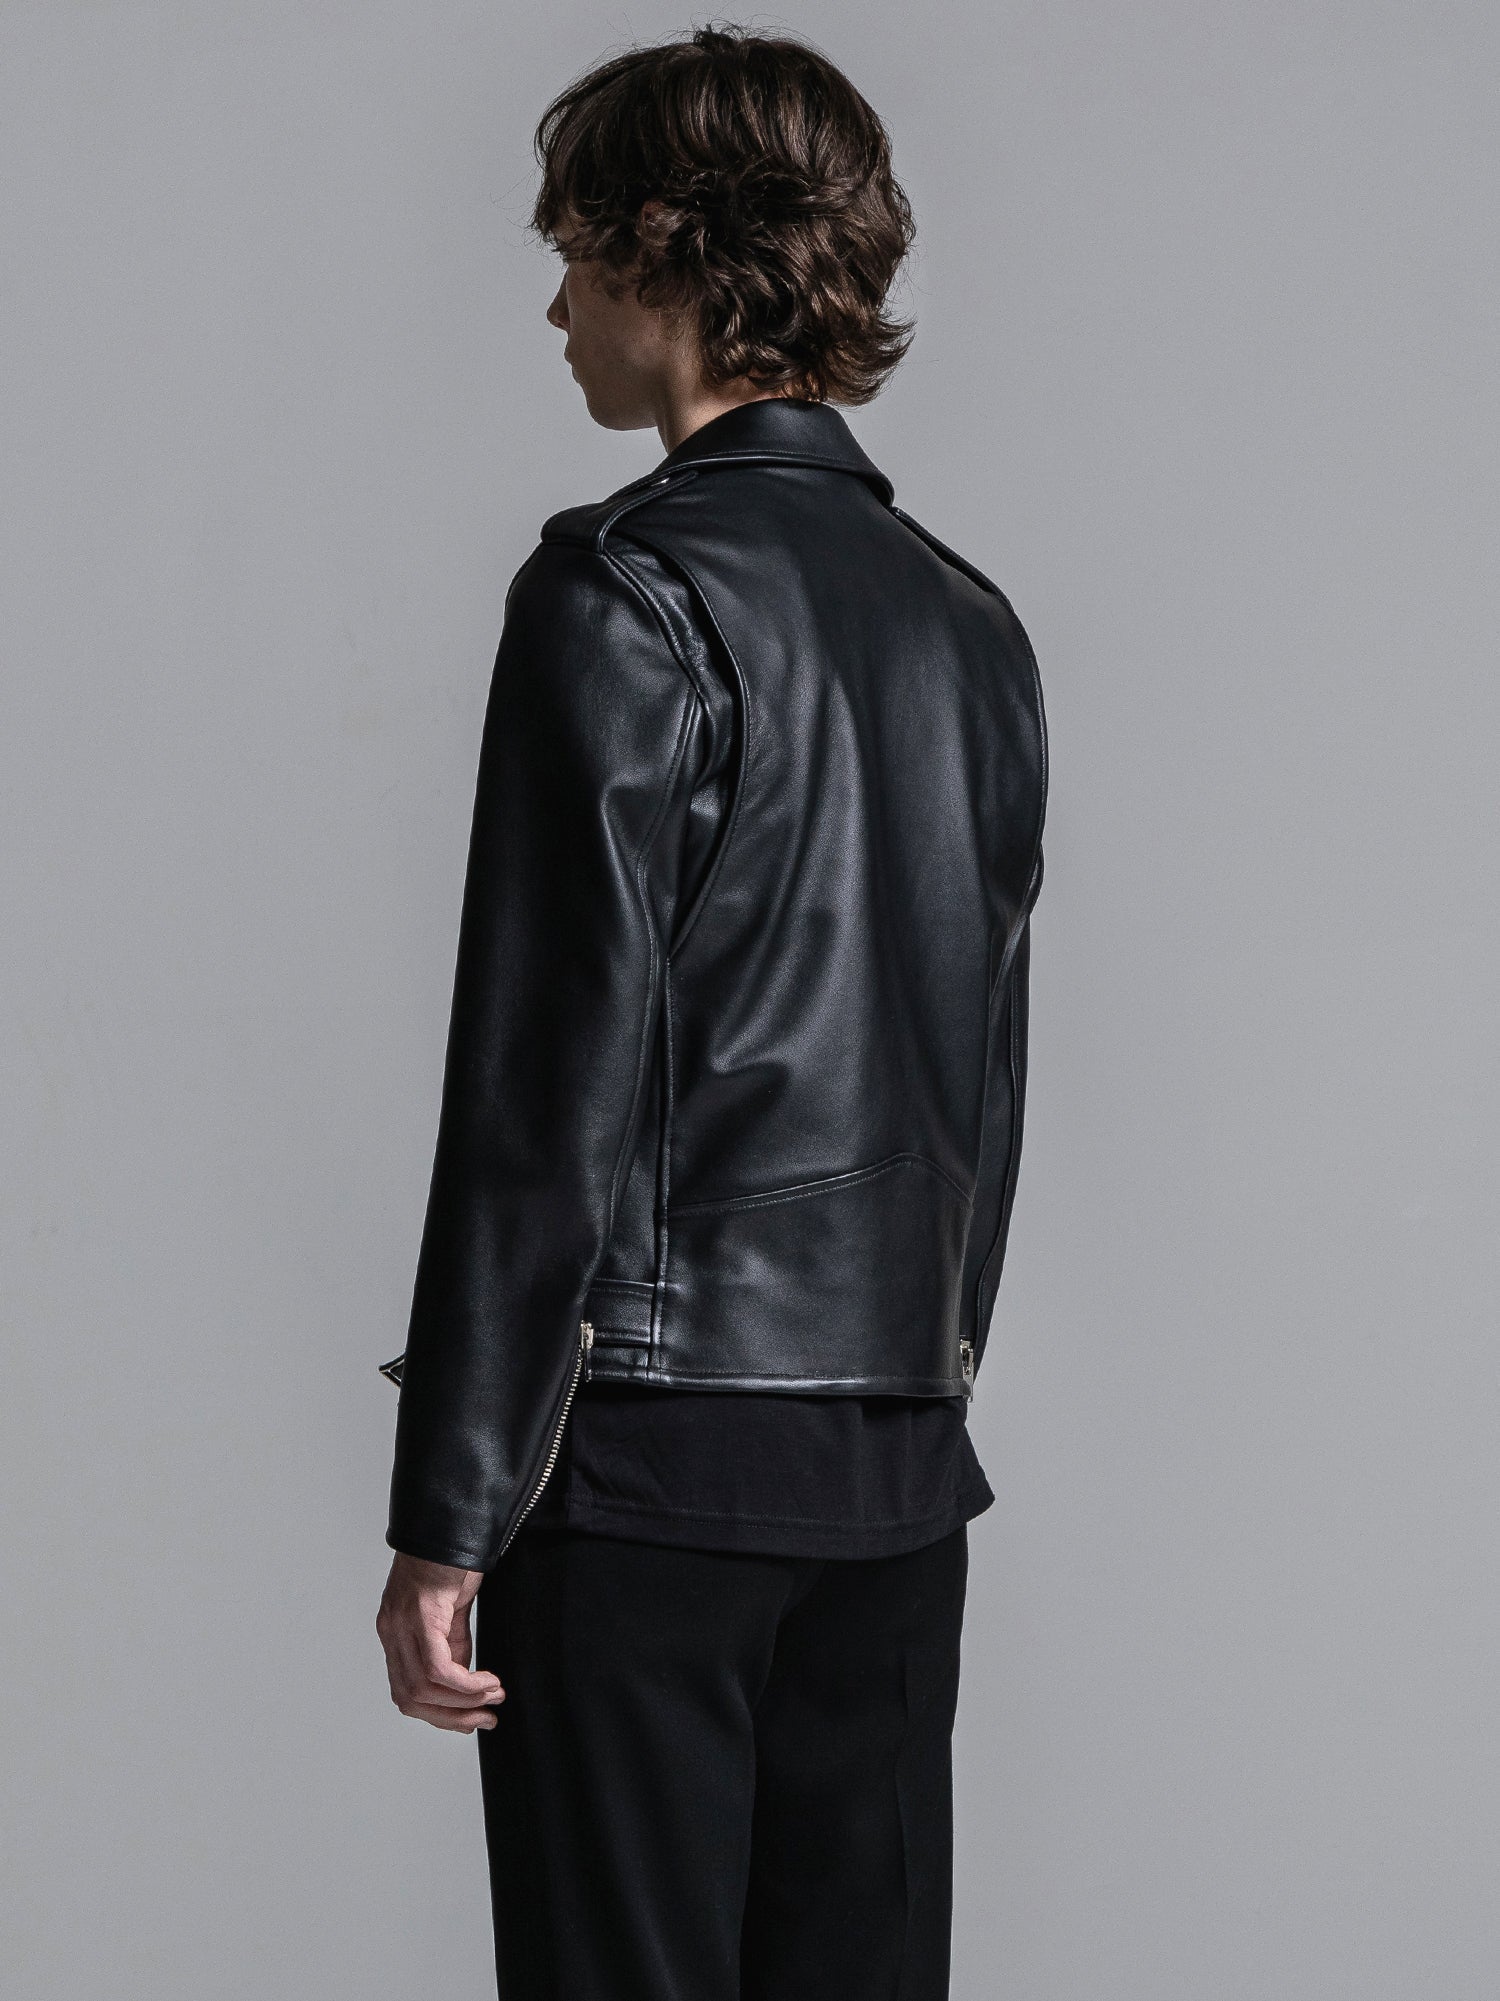 LITHIUM 16AW LAMB LEATHER W-RIDERS ライダース